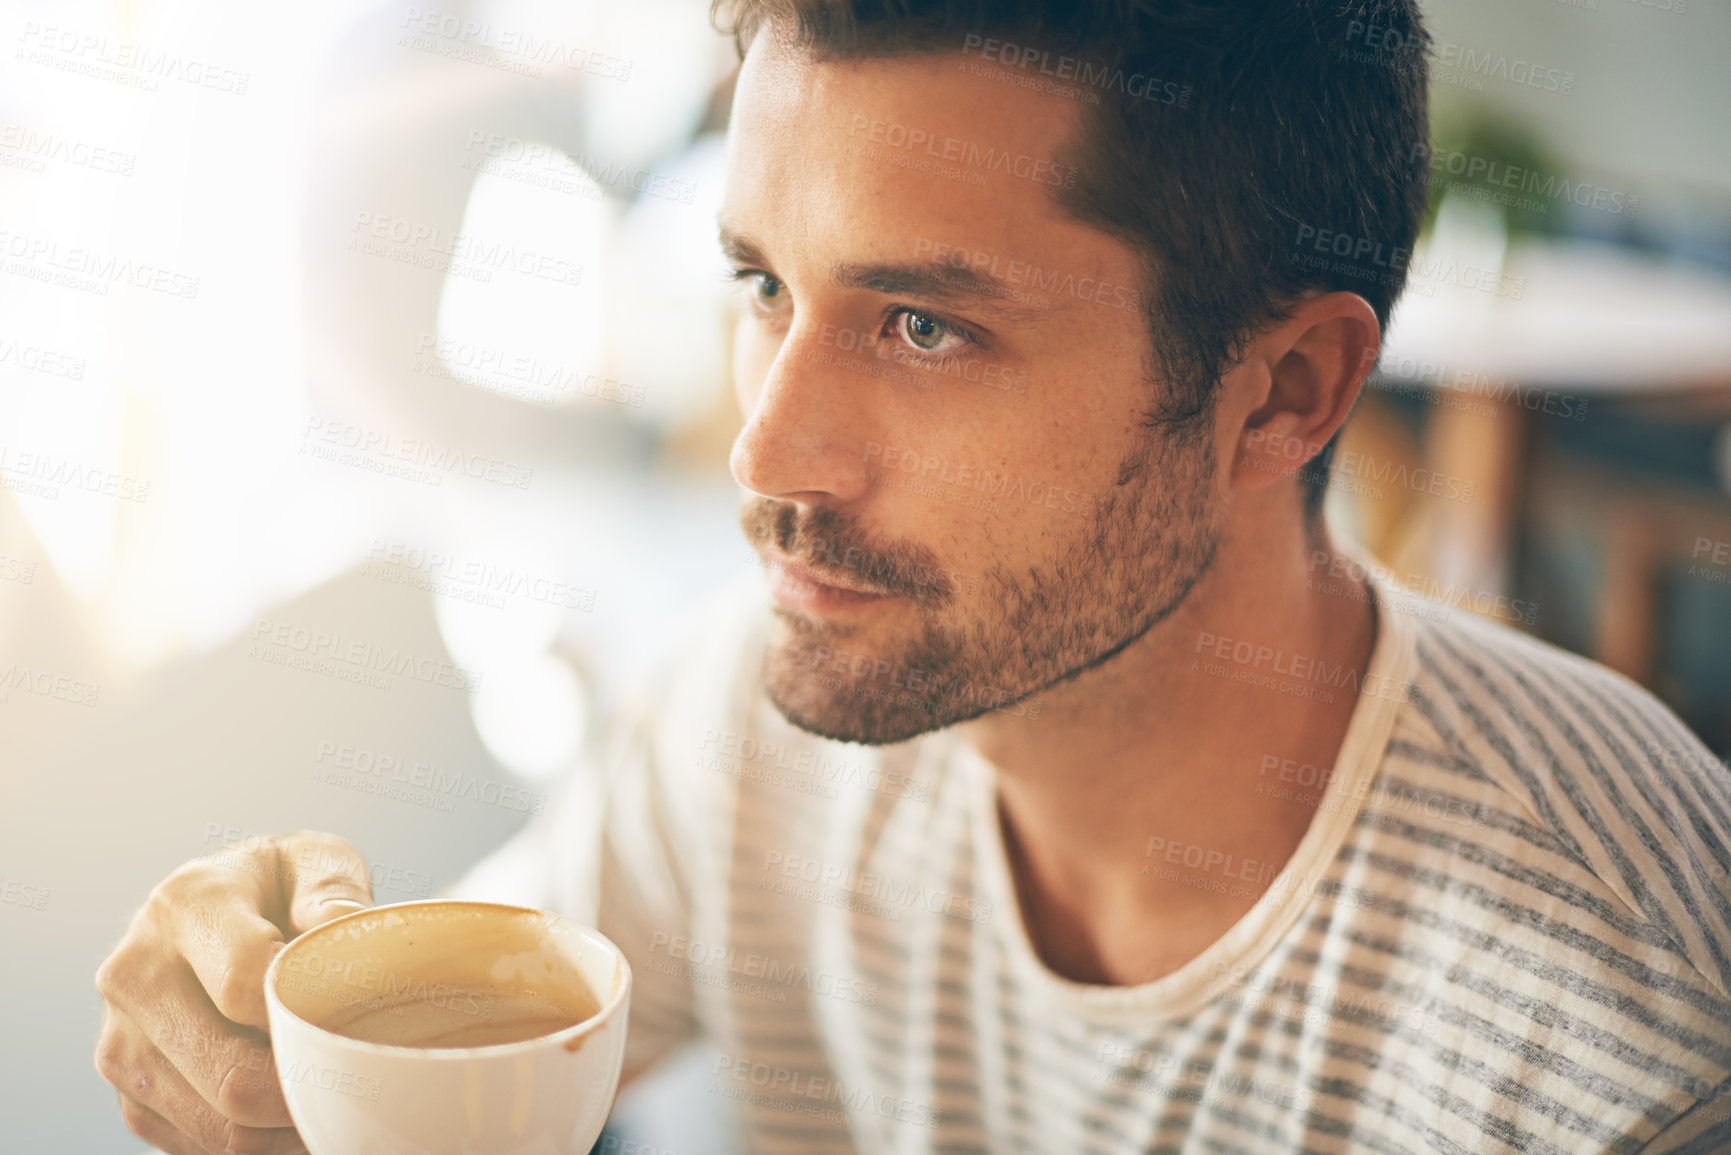 Closeup shot of a young man having a cup of coffee at a cafe - stock photo ...